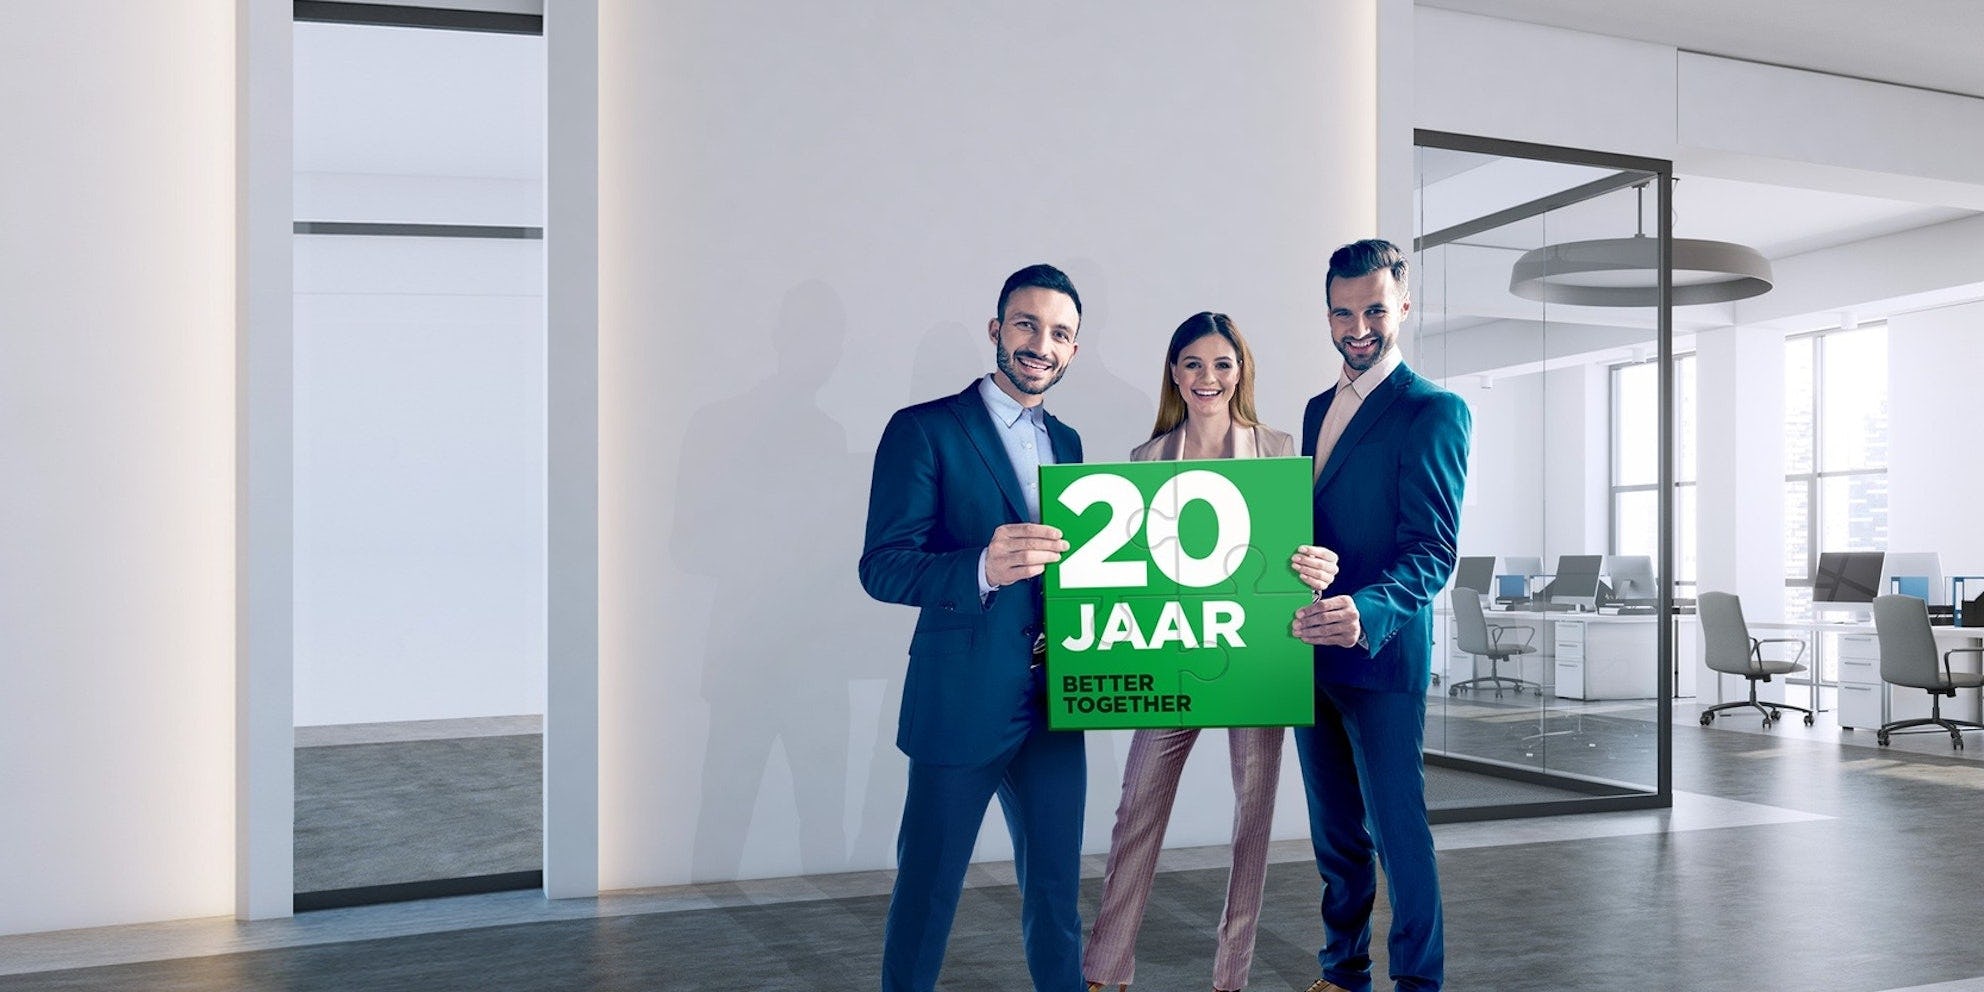 Conclusion Consulting 20 jaar business consultants